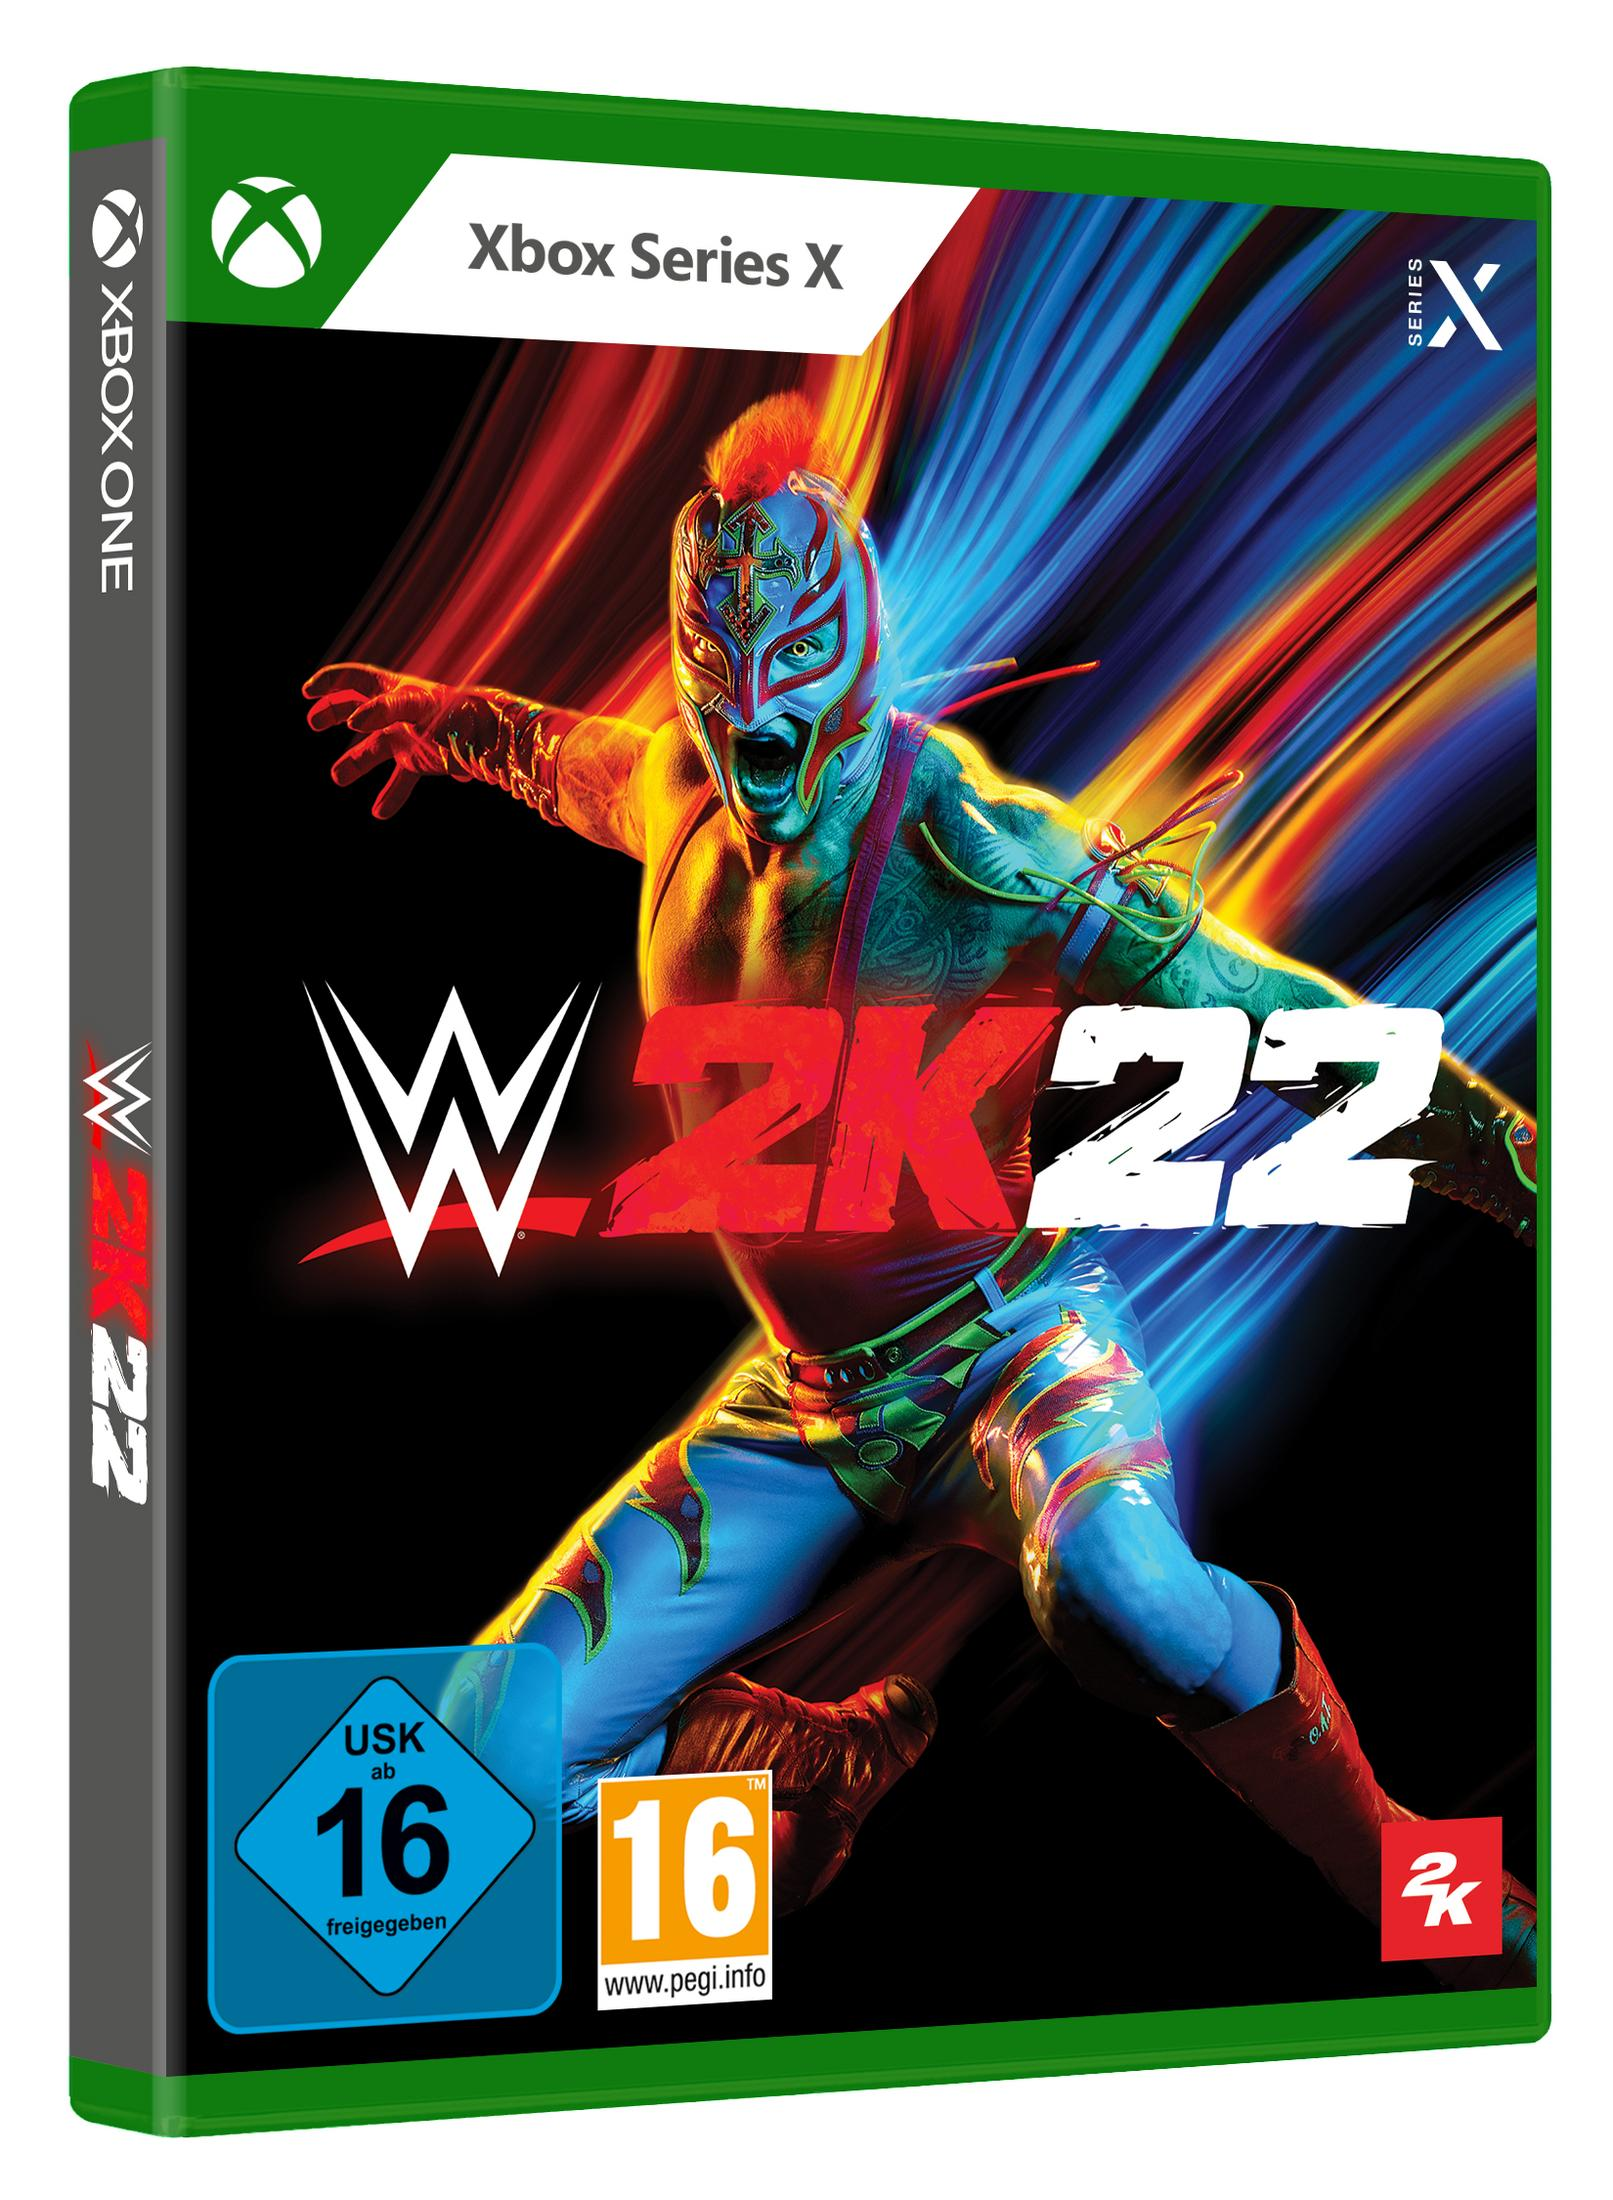 Edition - X|S] Deluxe [Xbox Series WWE - 2K22